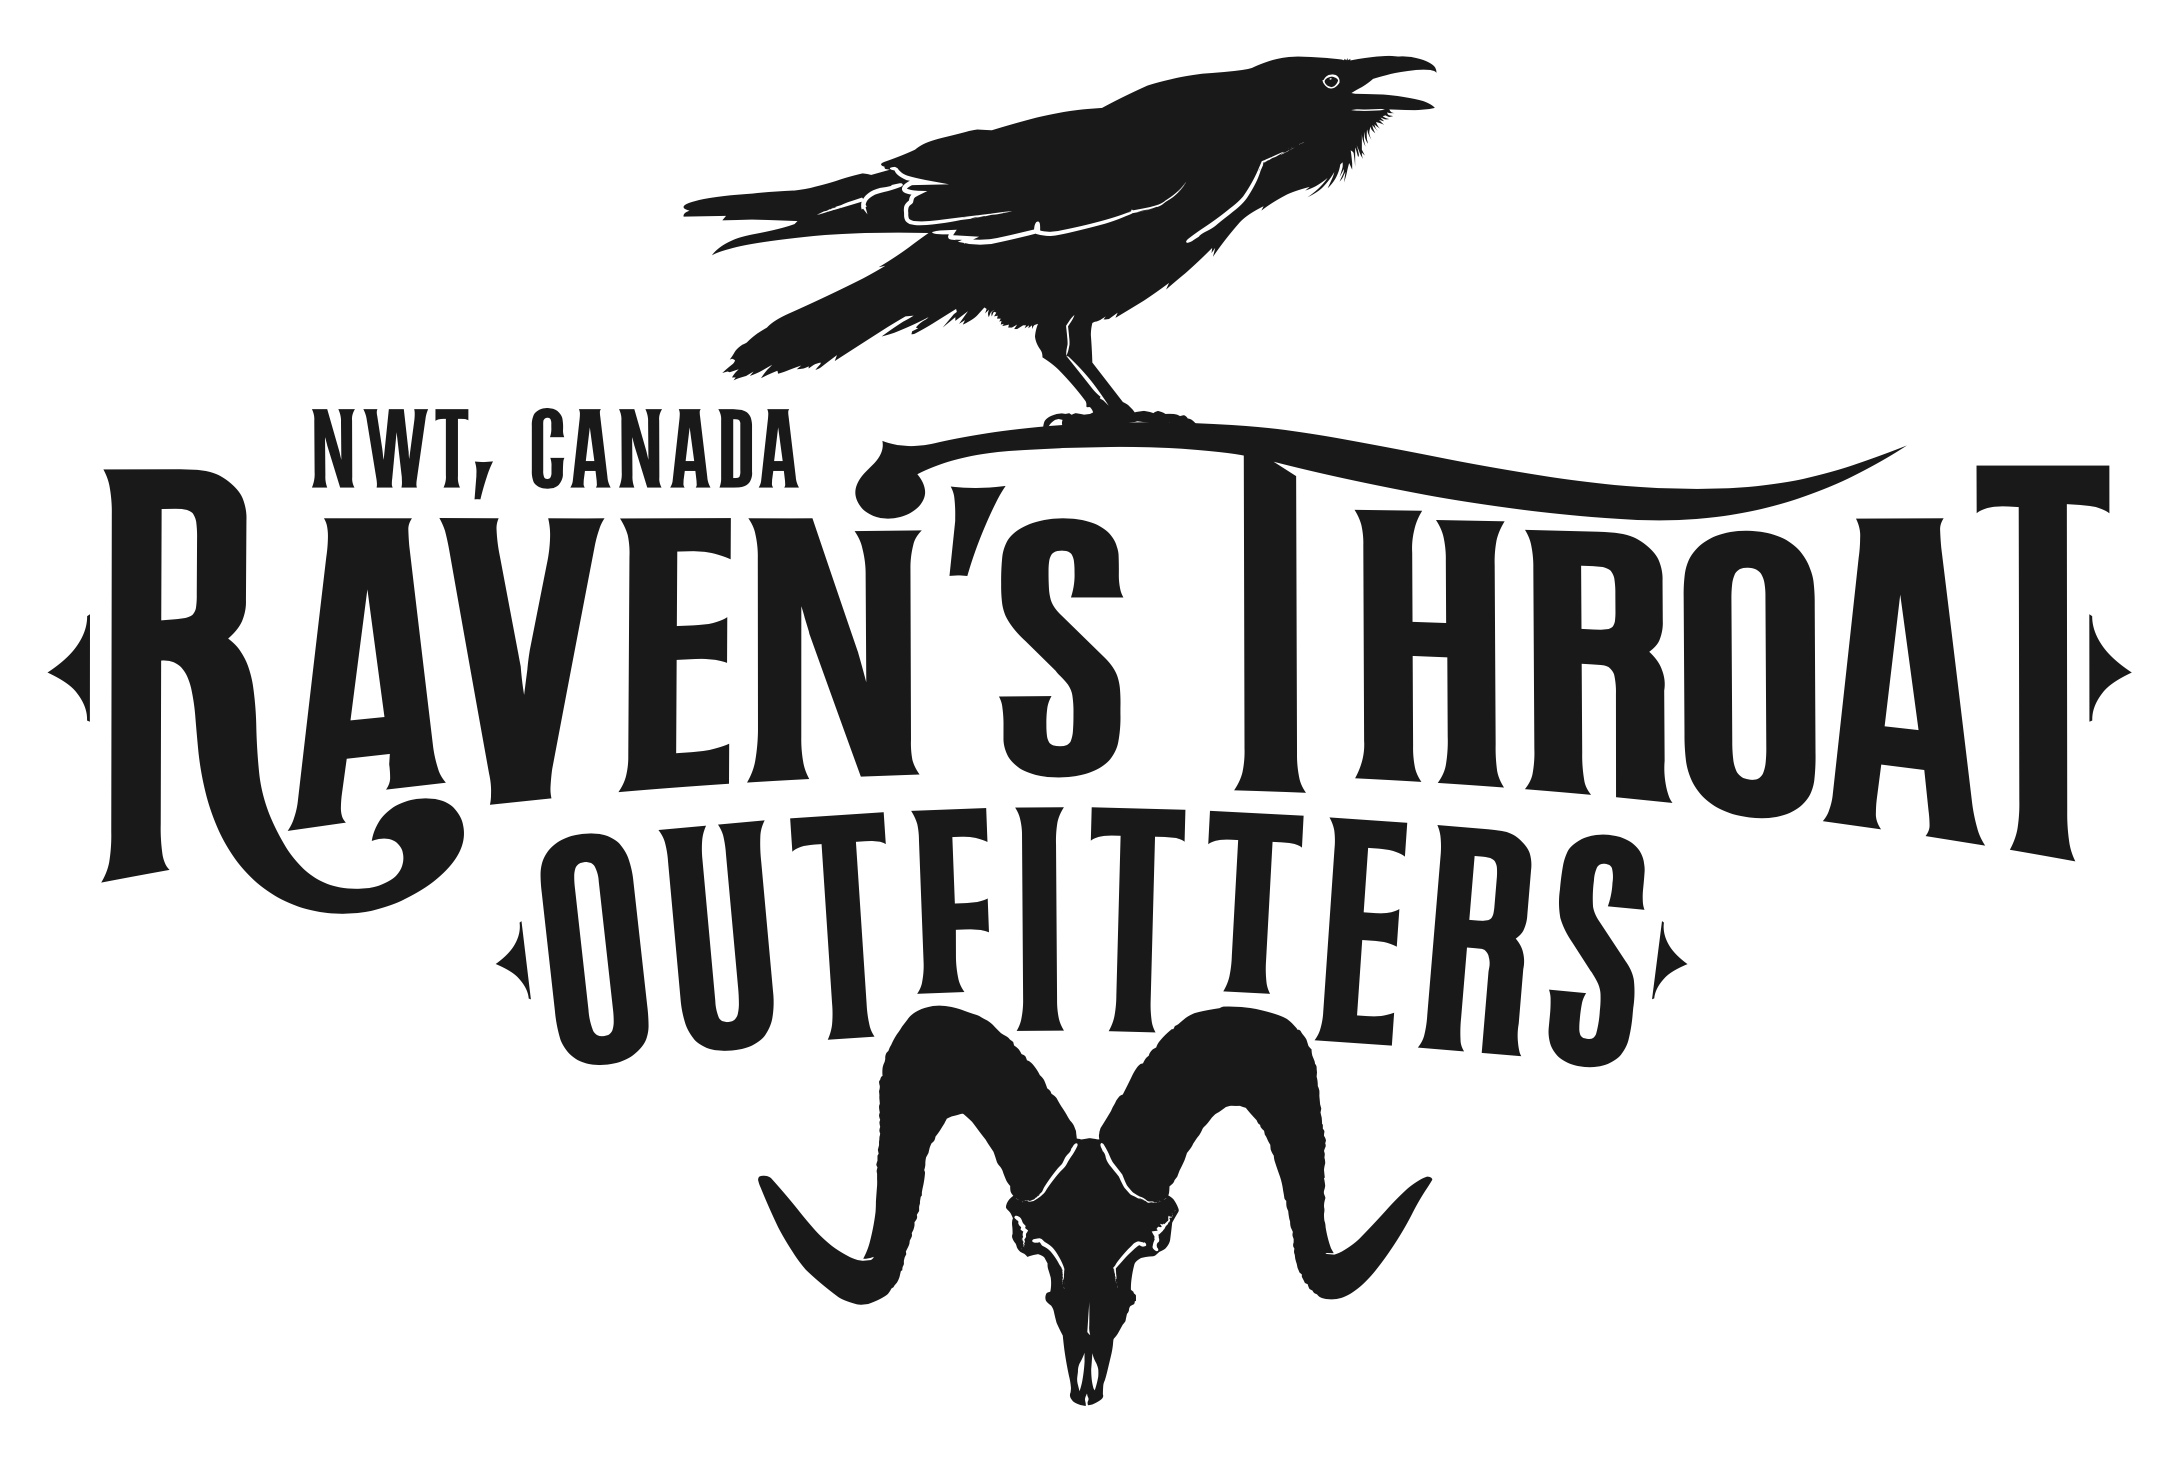 Raven's Throat Outfitters